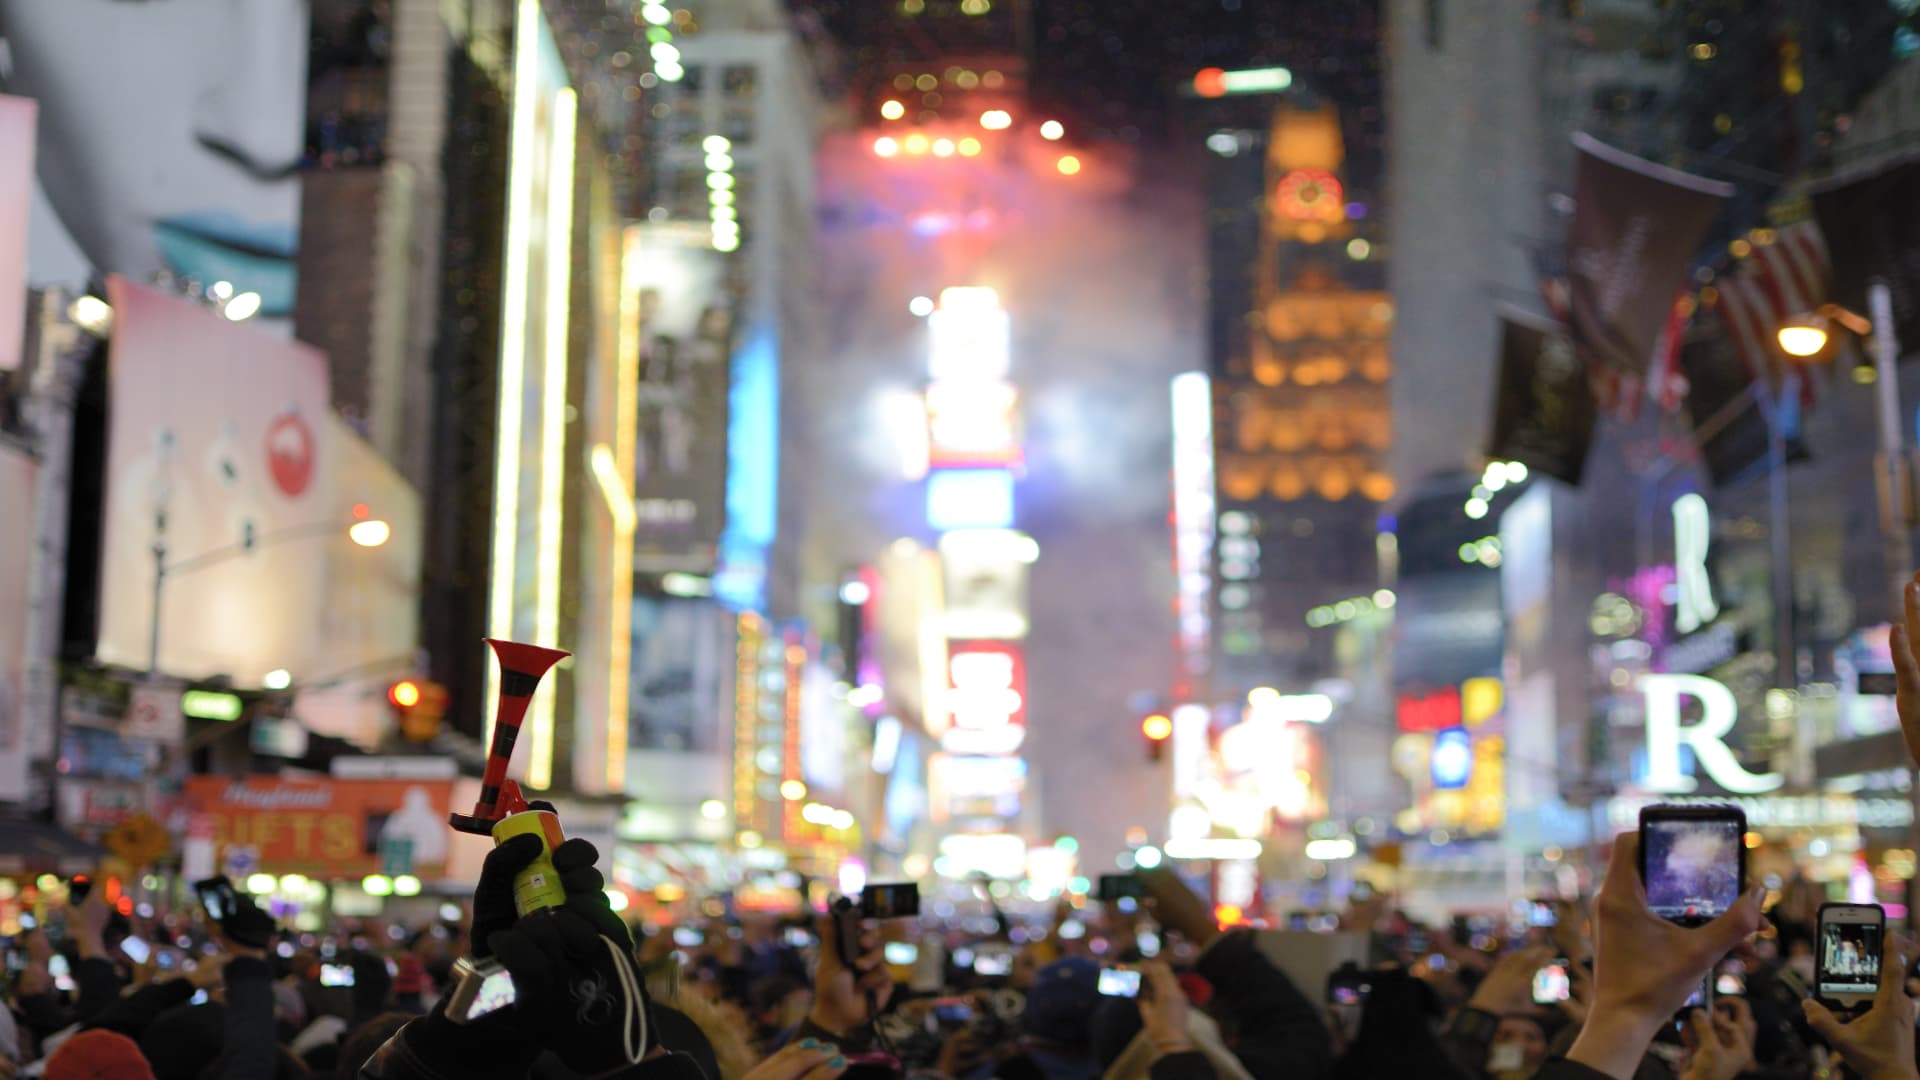 New Year's Eve celebration in Times Square, New York City.